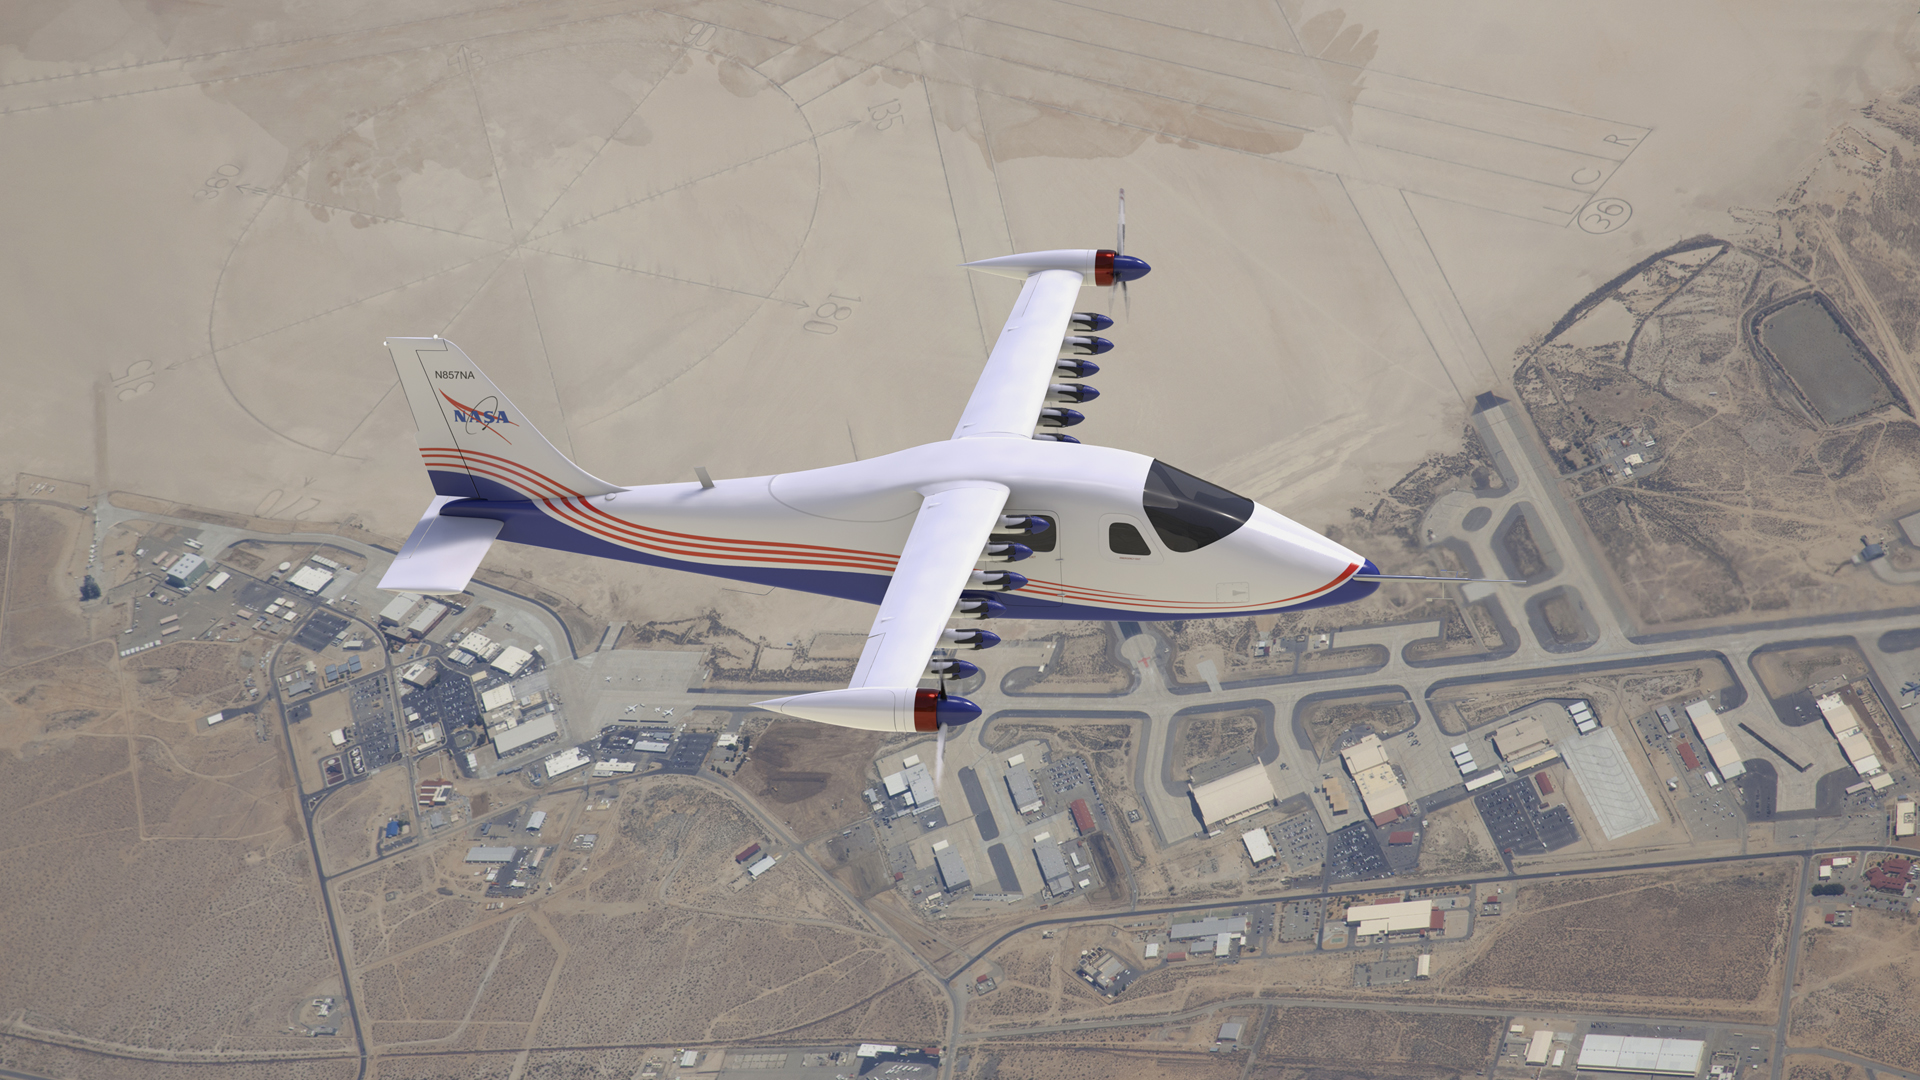 Artist concept of the X-57 Maxwell in flight over NASA's Armstrong Flight Research Center.